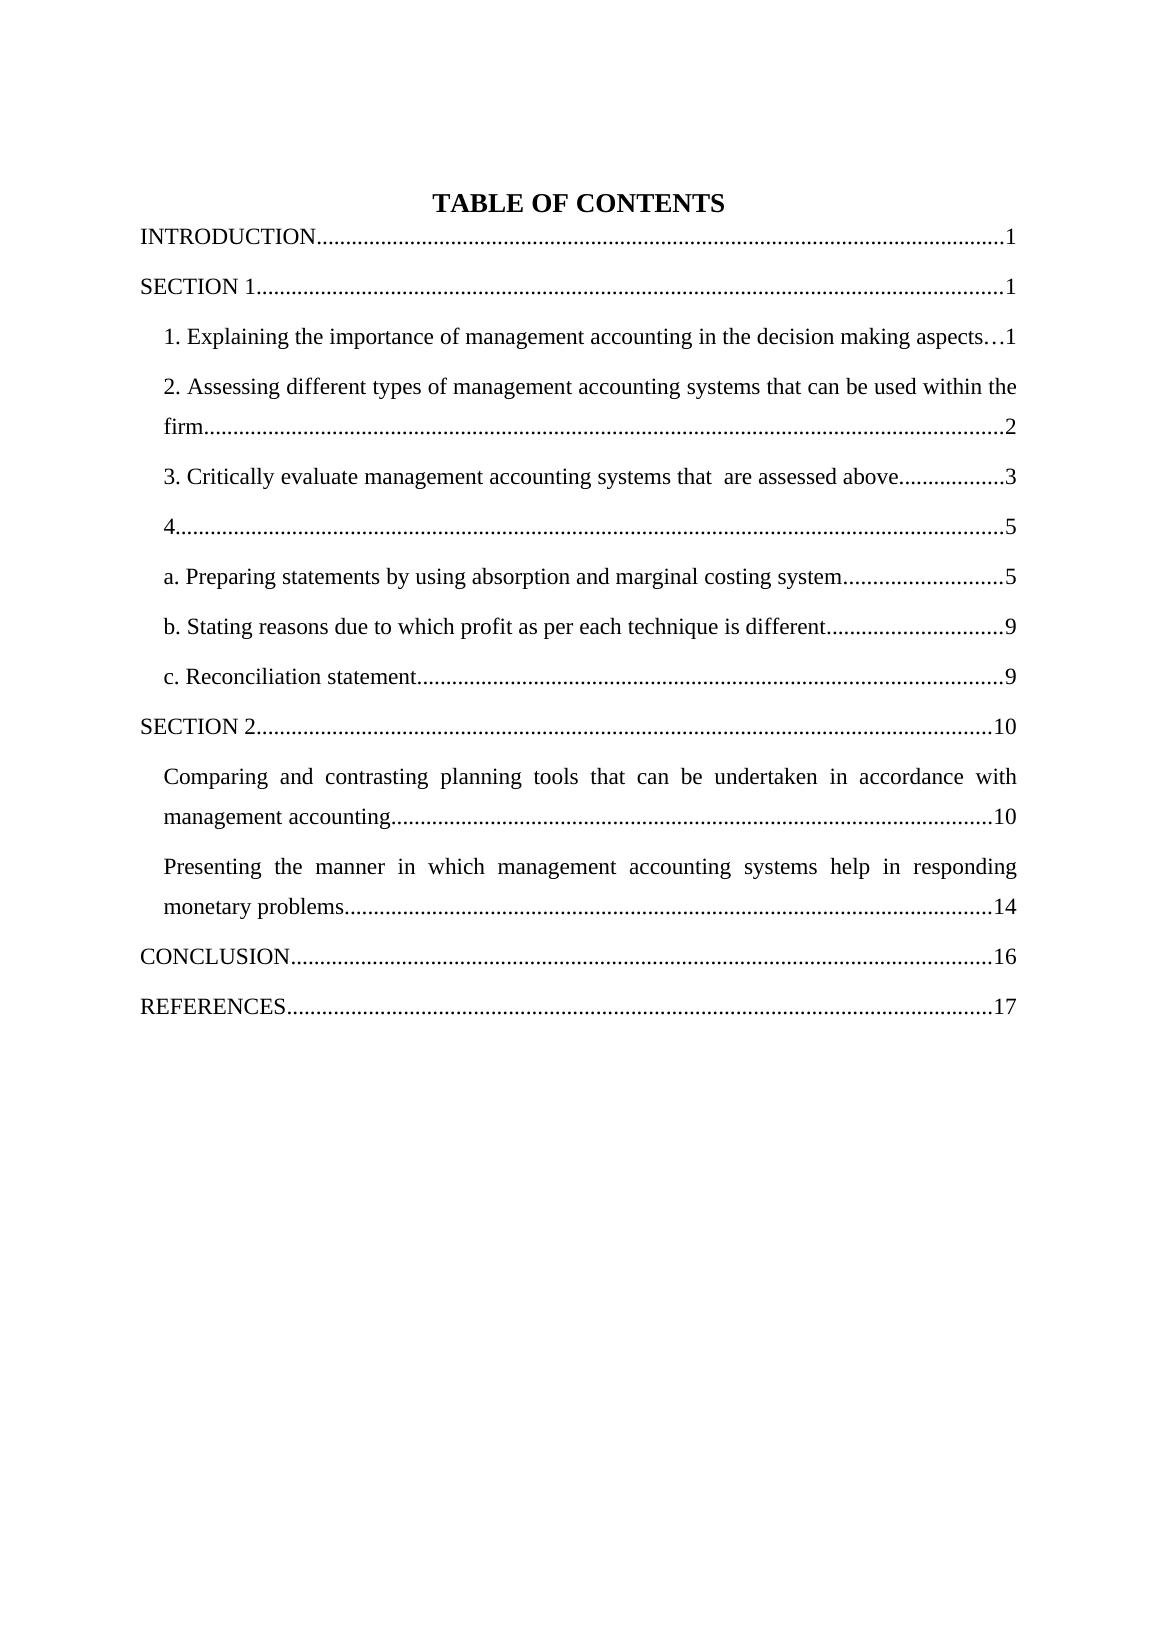 Management Accounting Research Sample_2